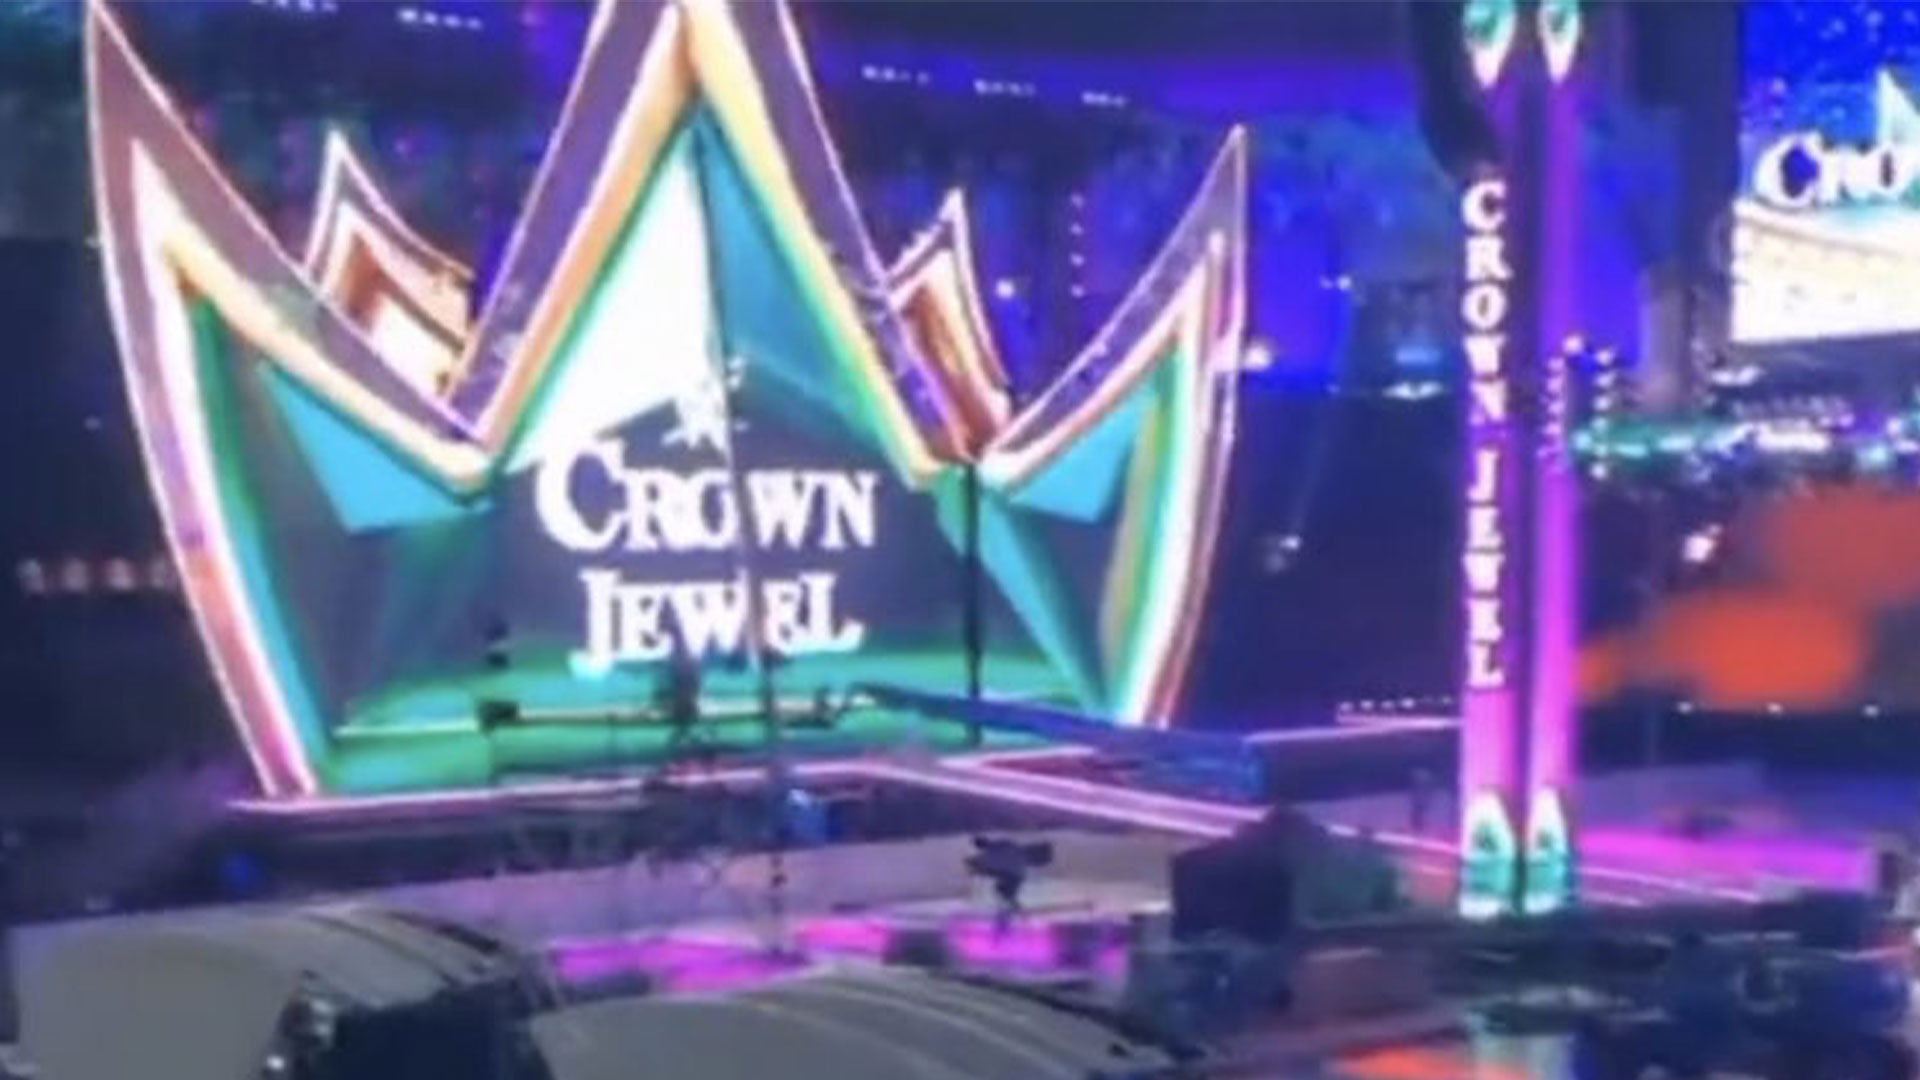 Crown Jewel Results 2021 Winners Include Roman Reigns, Big E, Becky